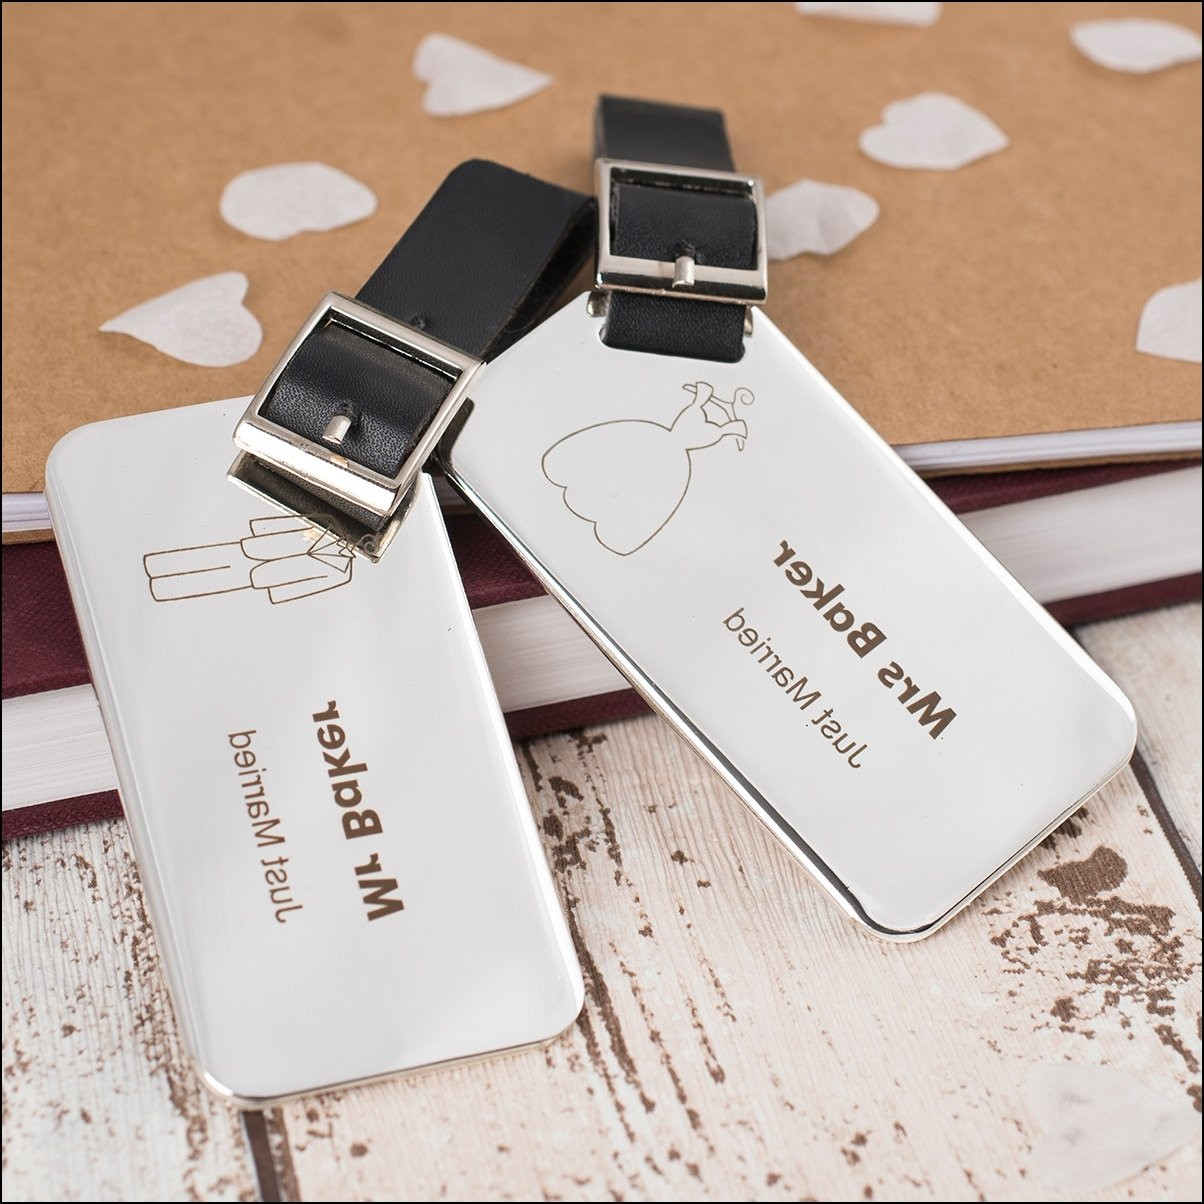 Wedding Gift Ideas For Couple That Has Everything
 10 Trendy Gift Ideas For Couples Who Have Everything 2020